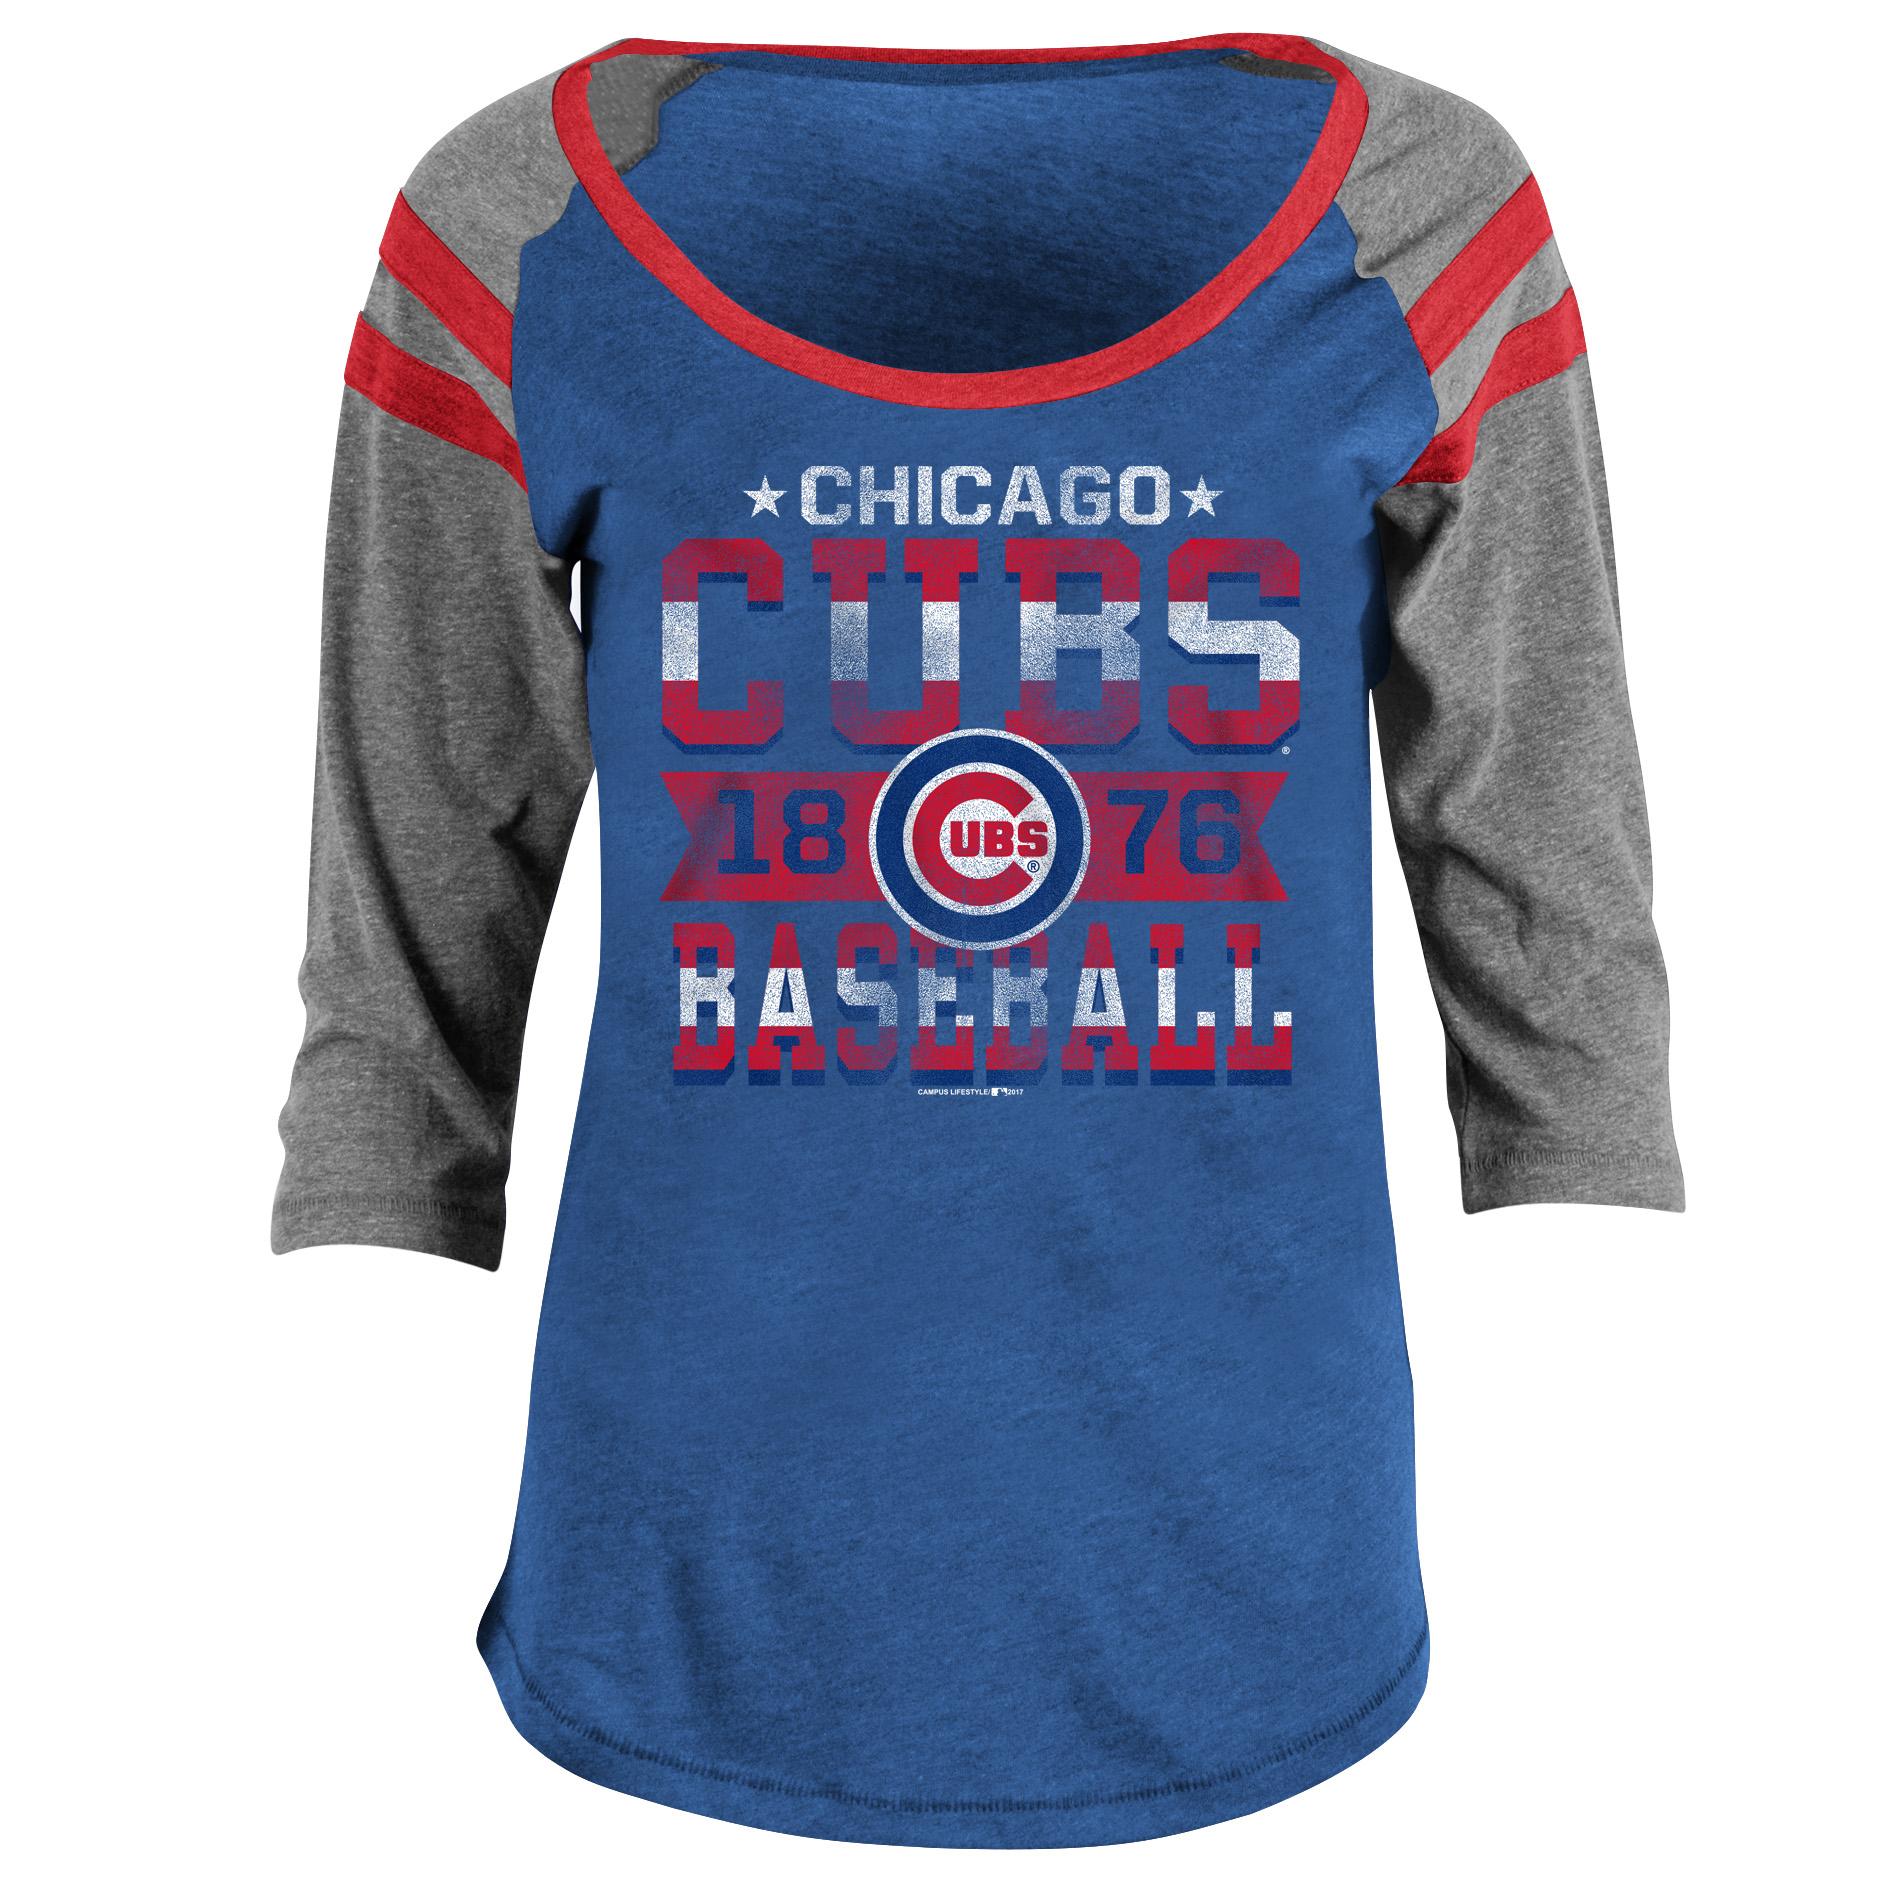 MLB Women's Graphic T-Shirt - Chicago Cubs